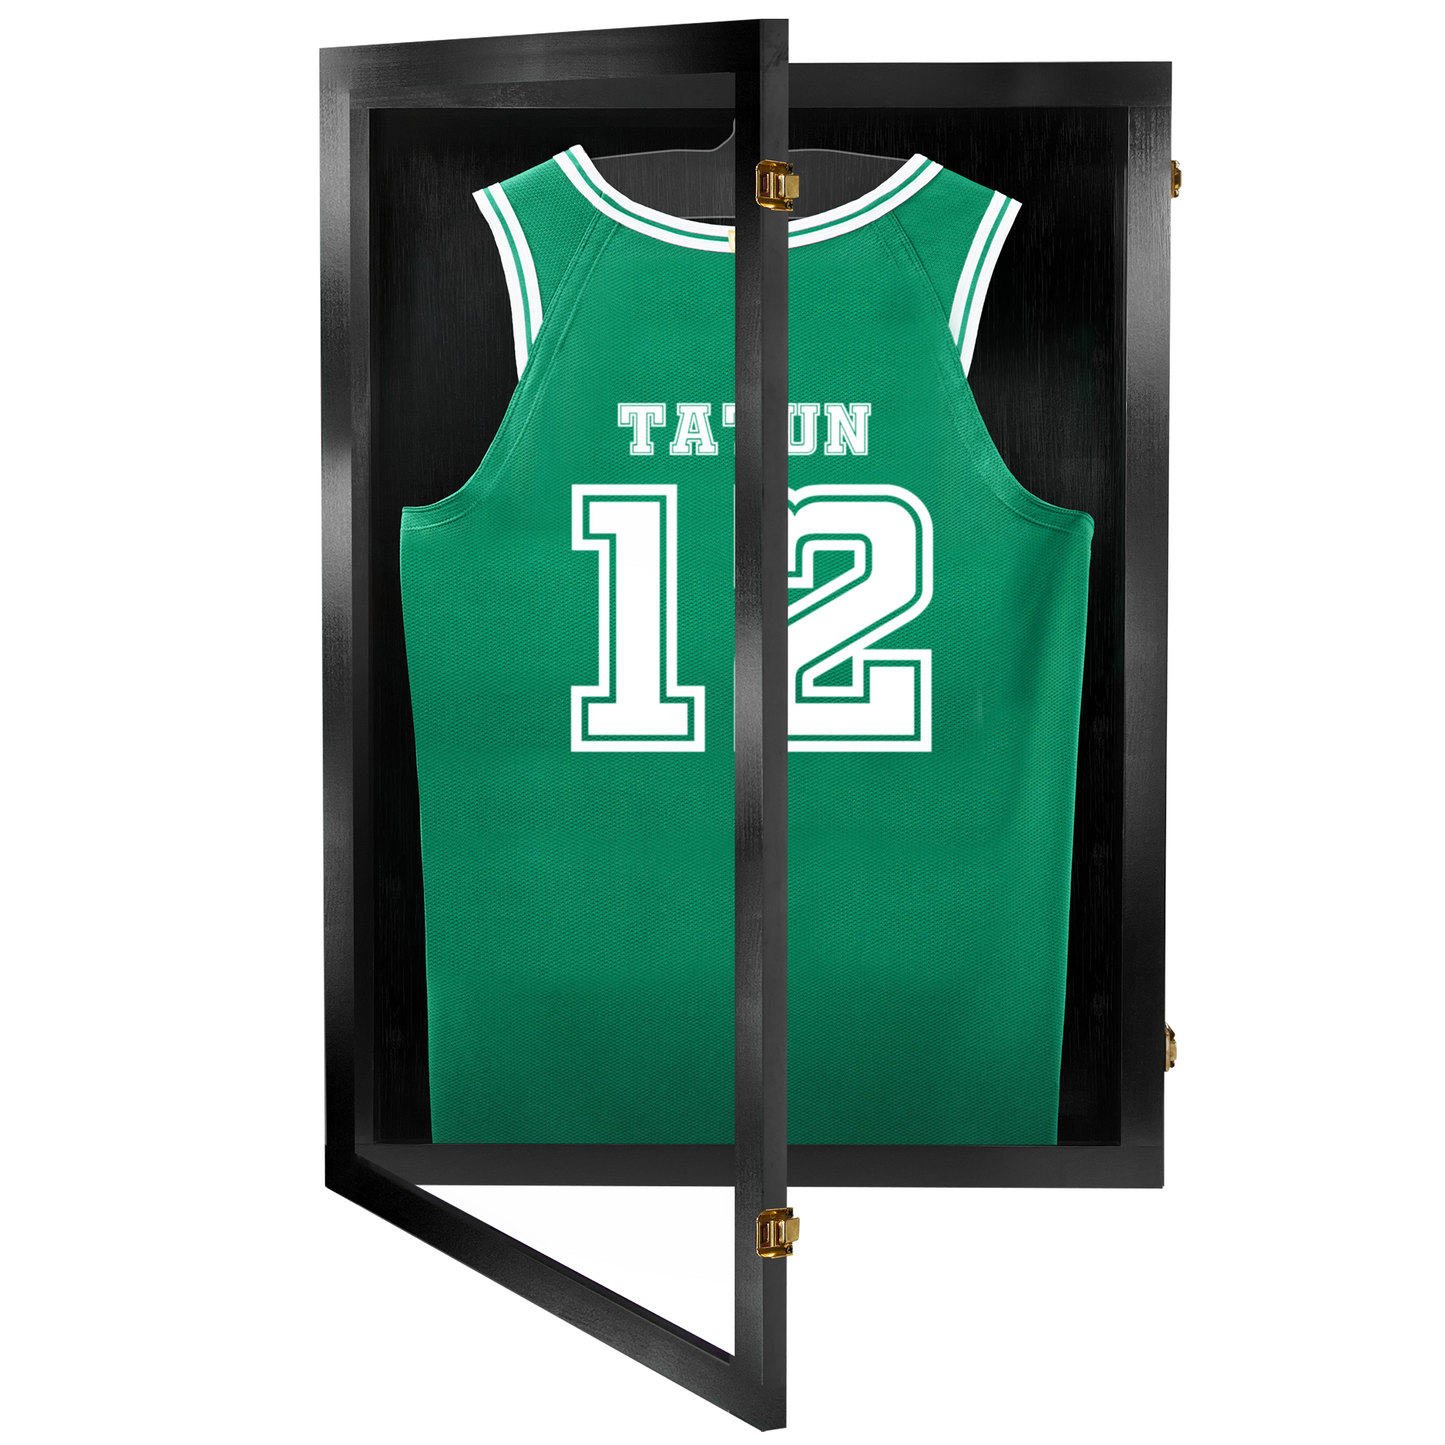 Jersey Display Case - Full size